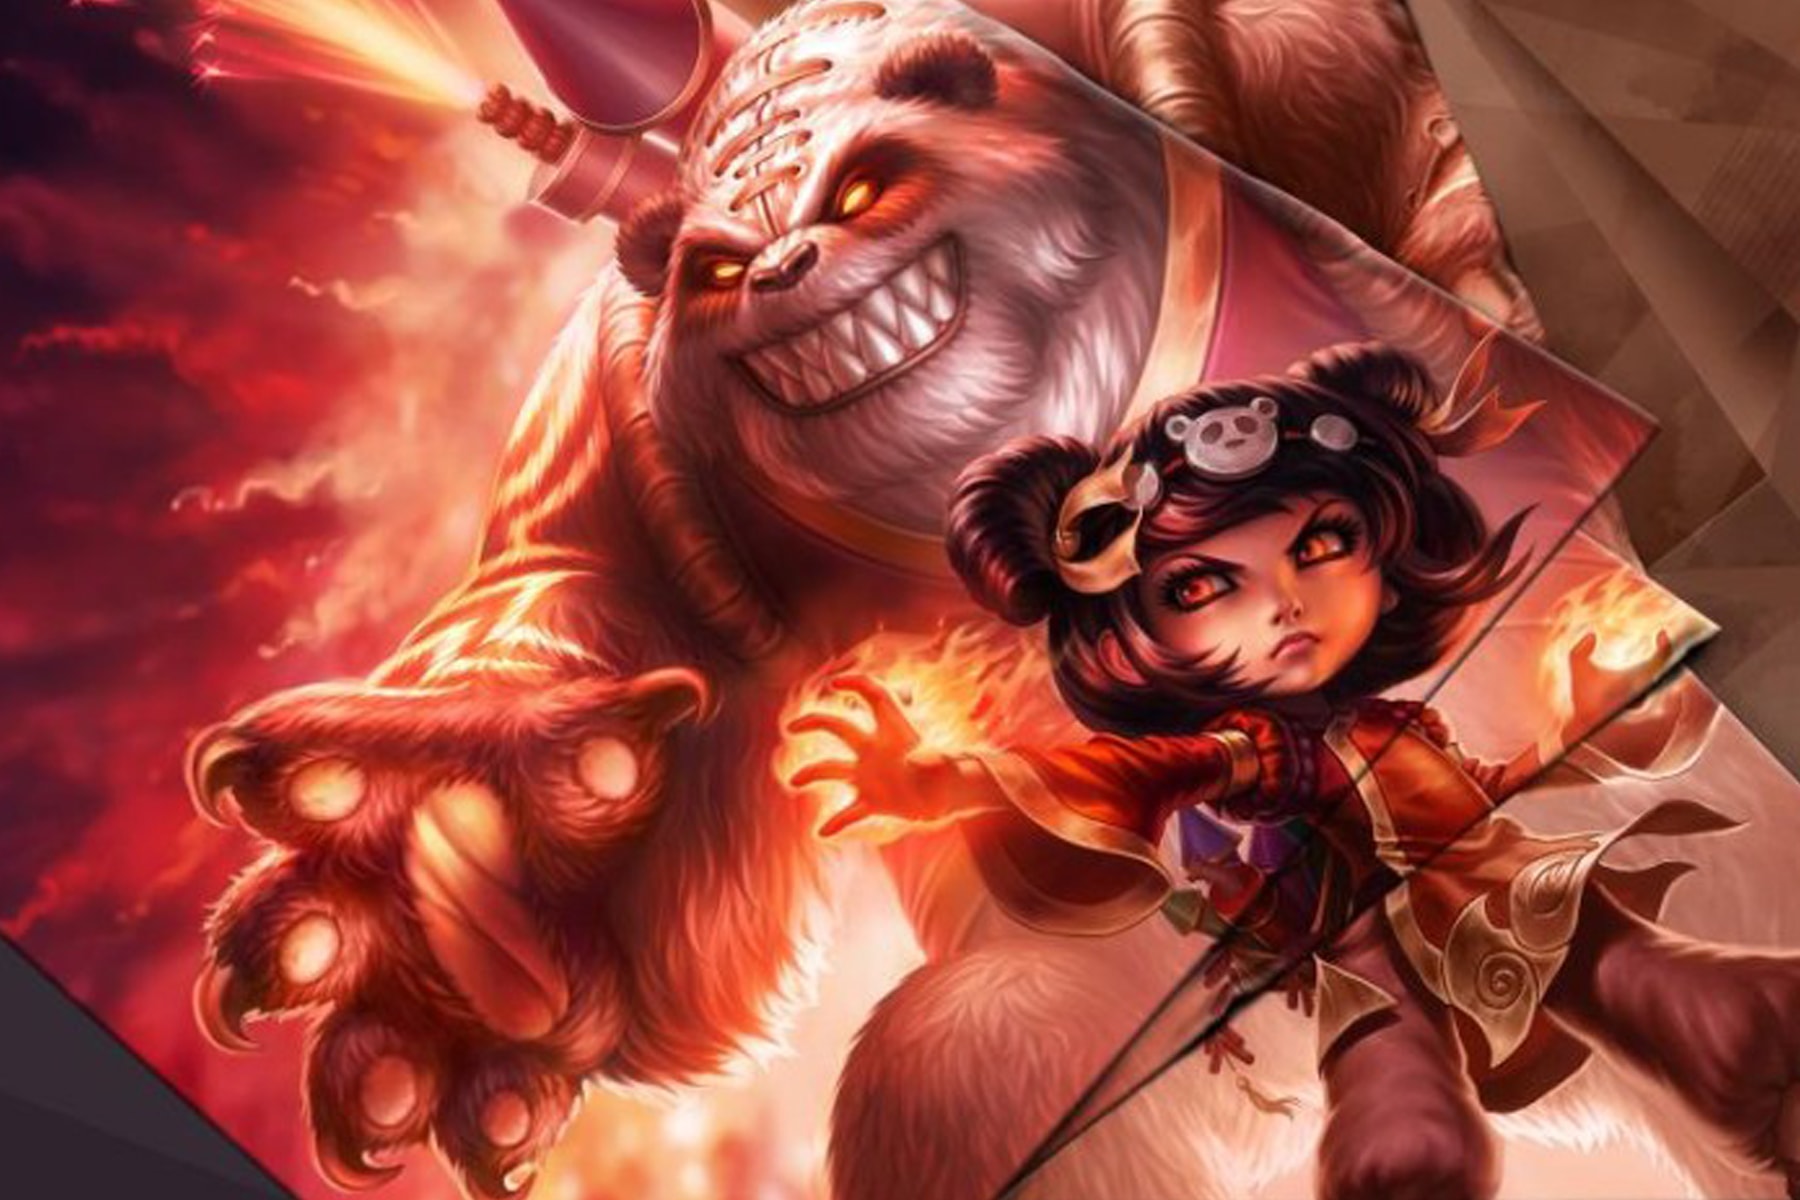 League of Legends character Annie and her giant pet bear menace an enemy against a fiery backdrop